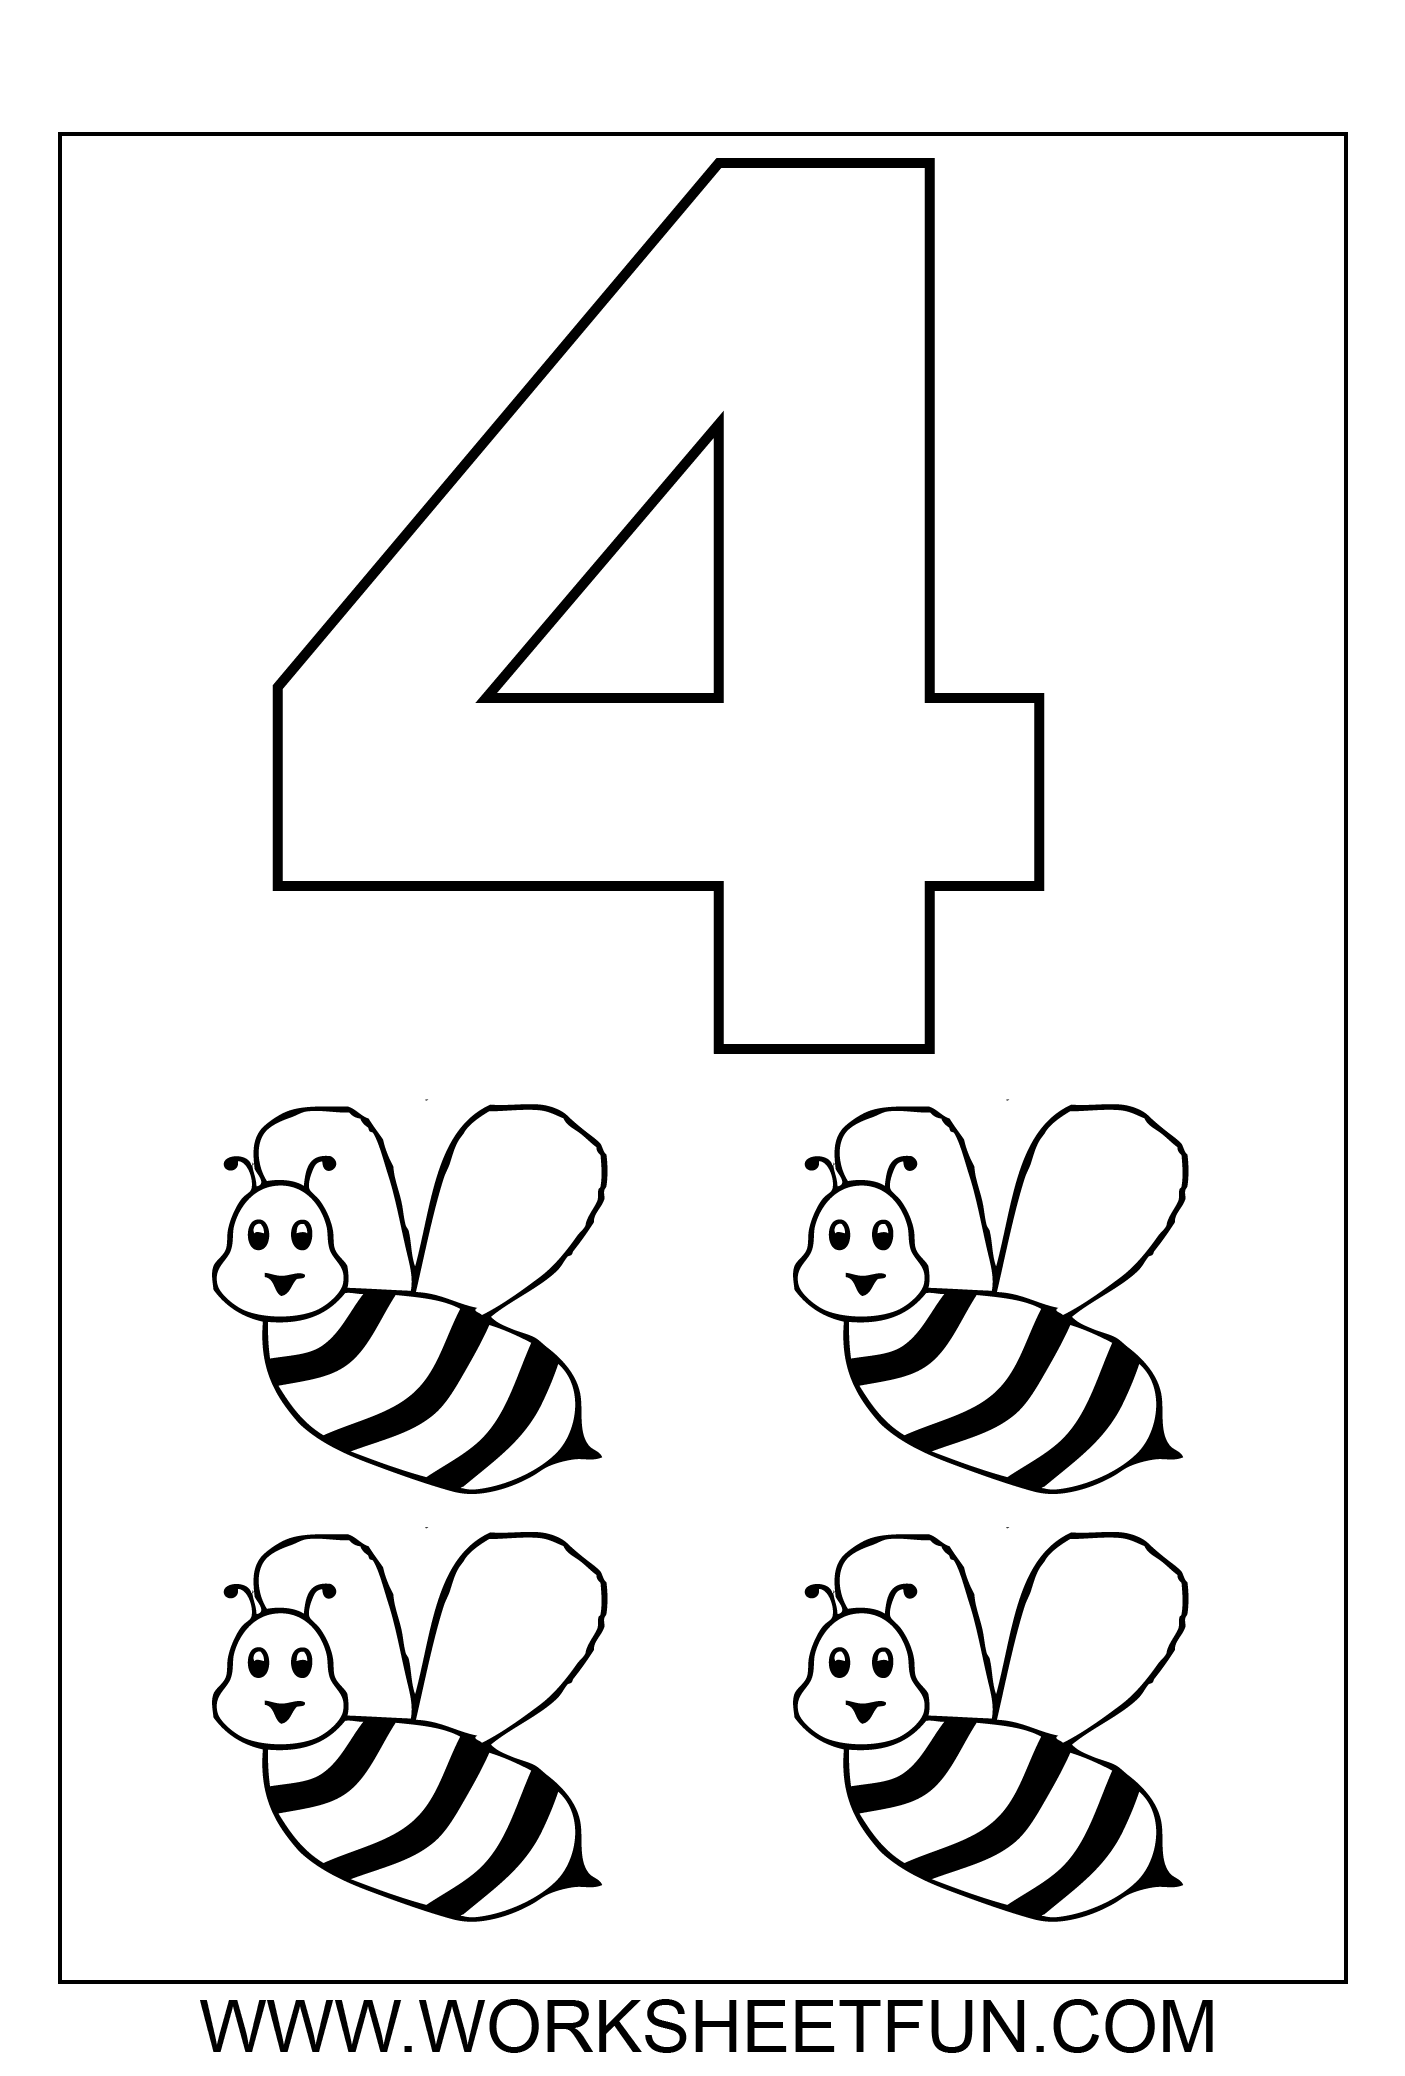 7 Best Images of Number 4 Coloring Pages Printable - Number 4 ...